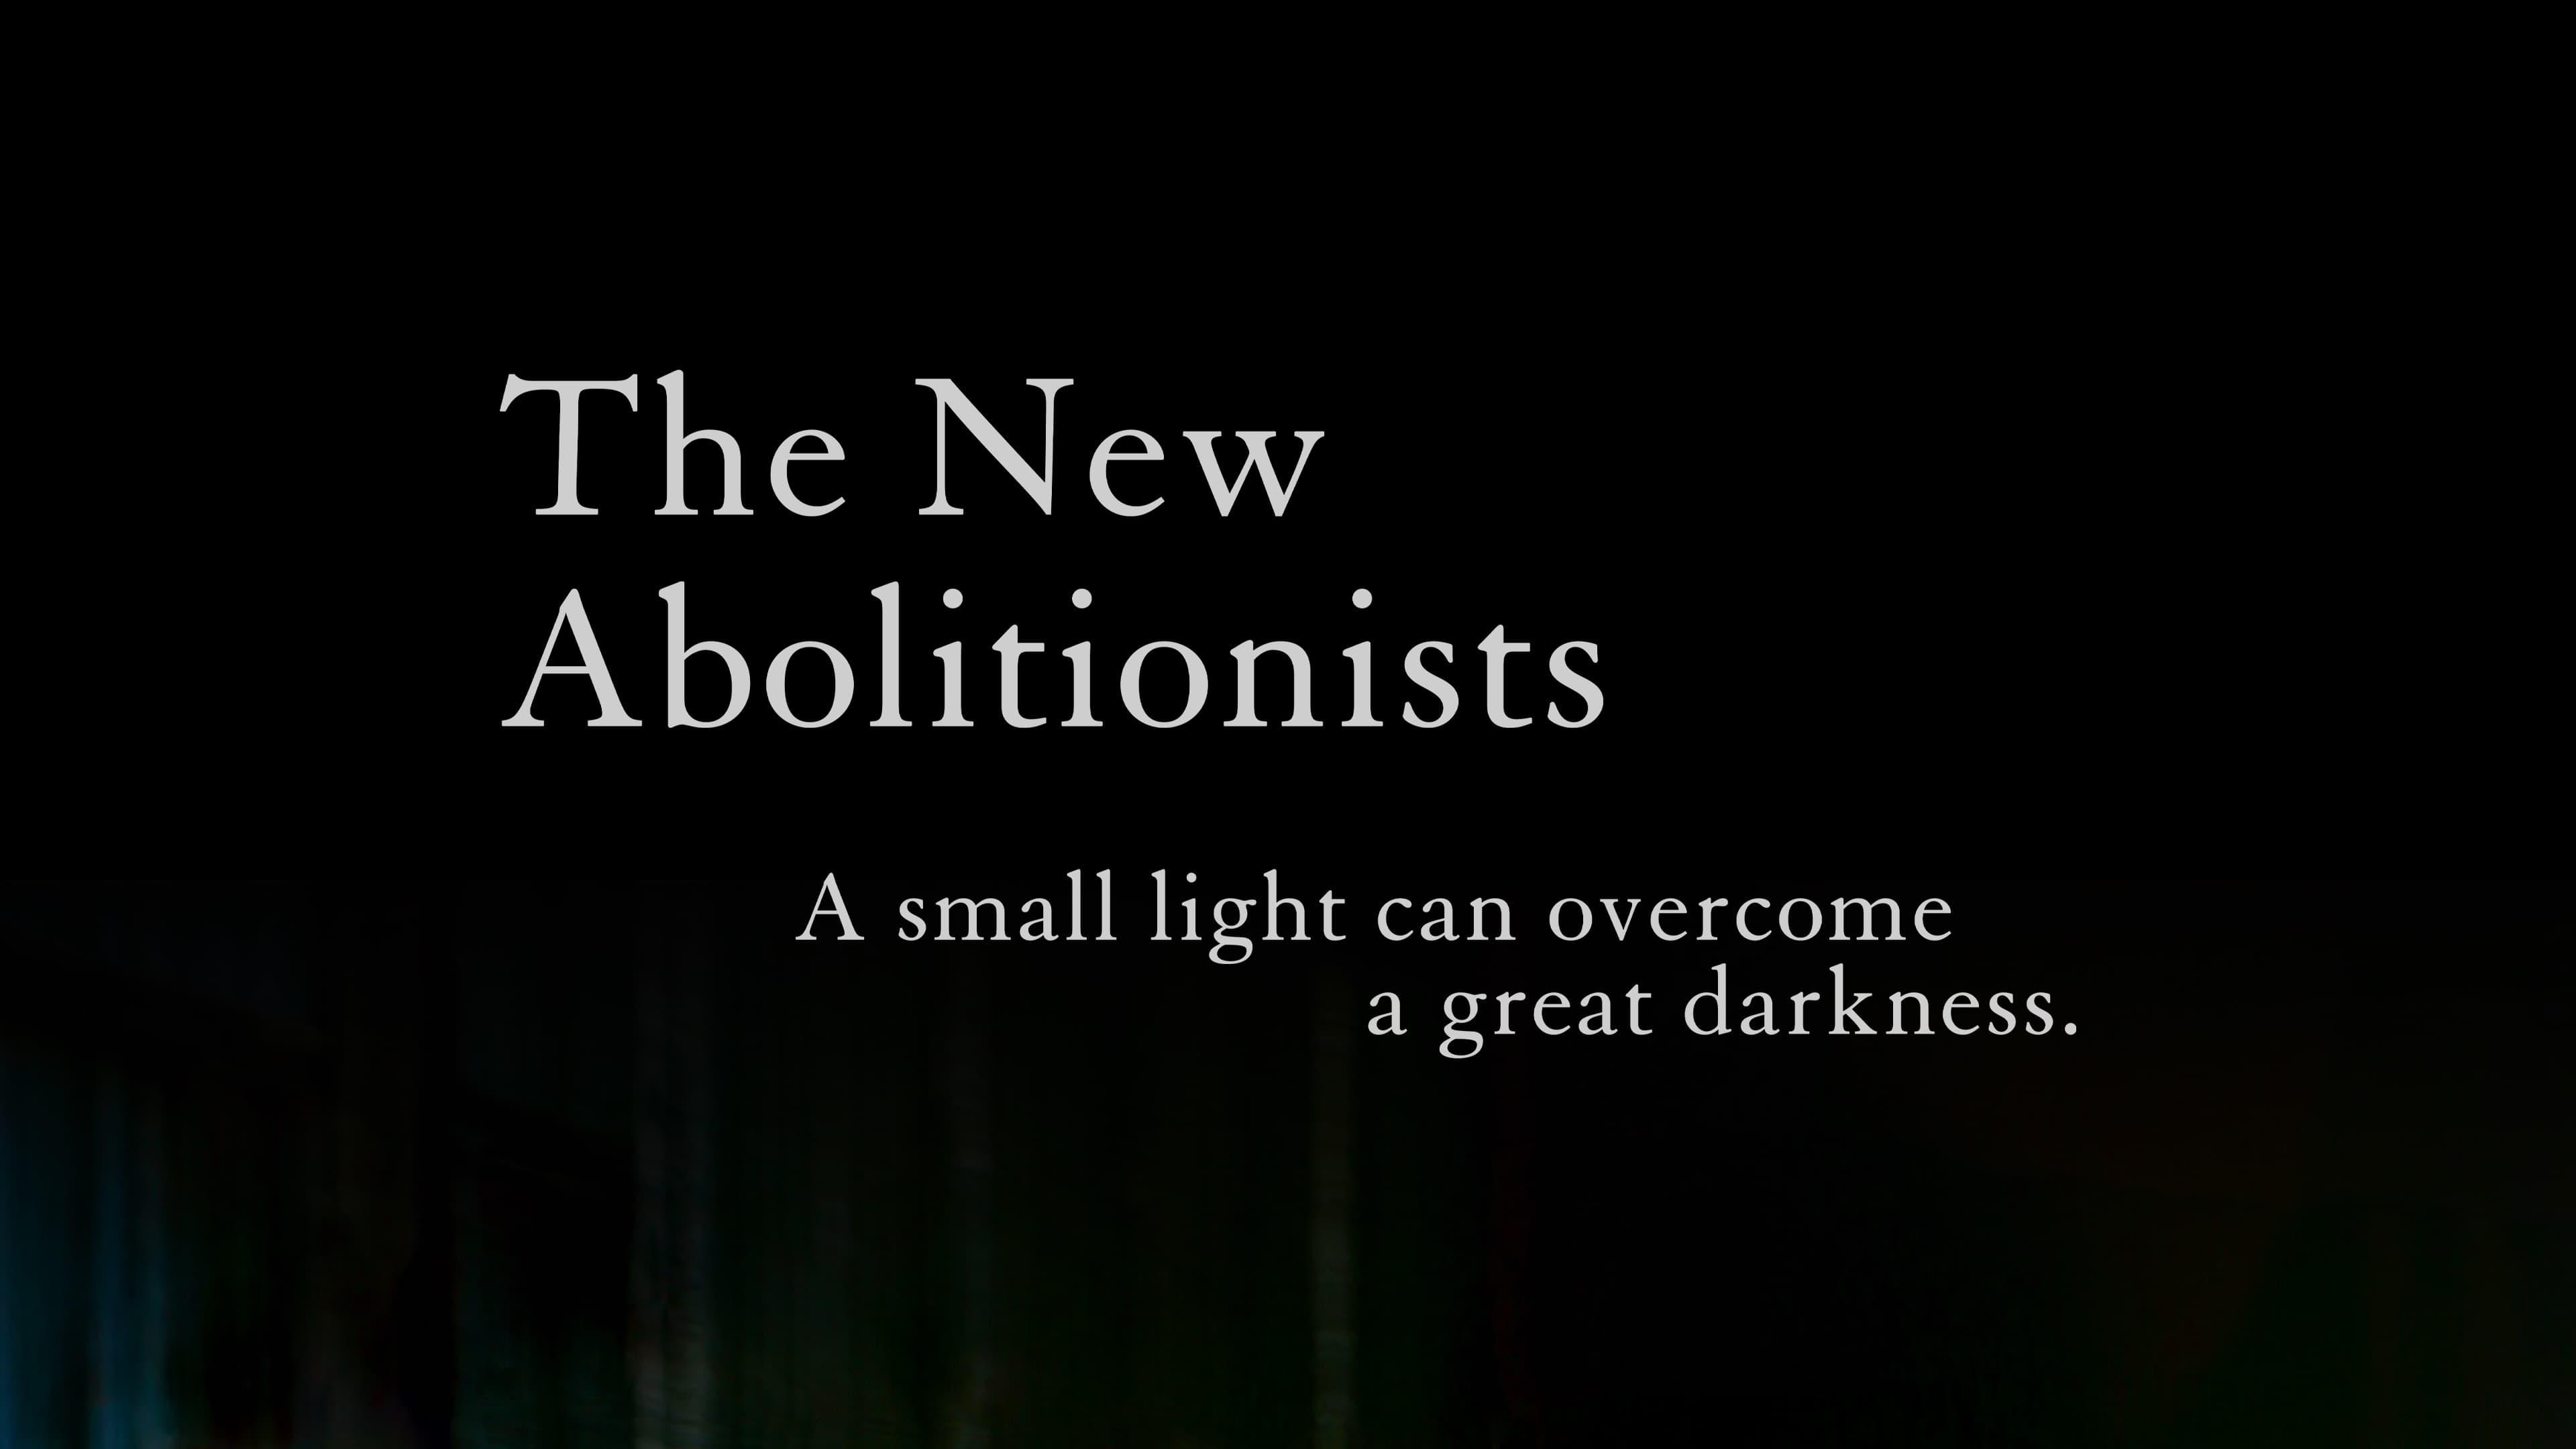 The New Abolitionists backdrop